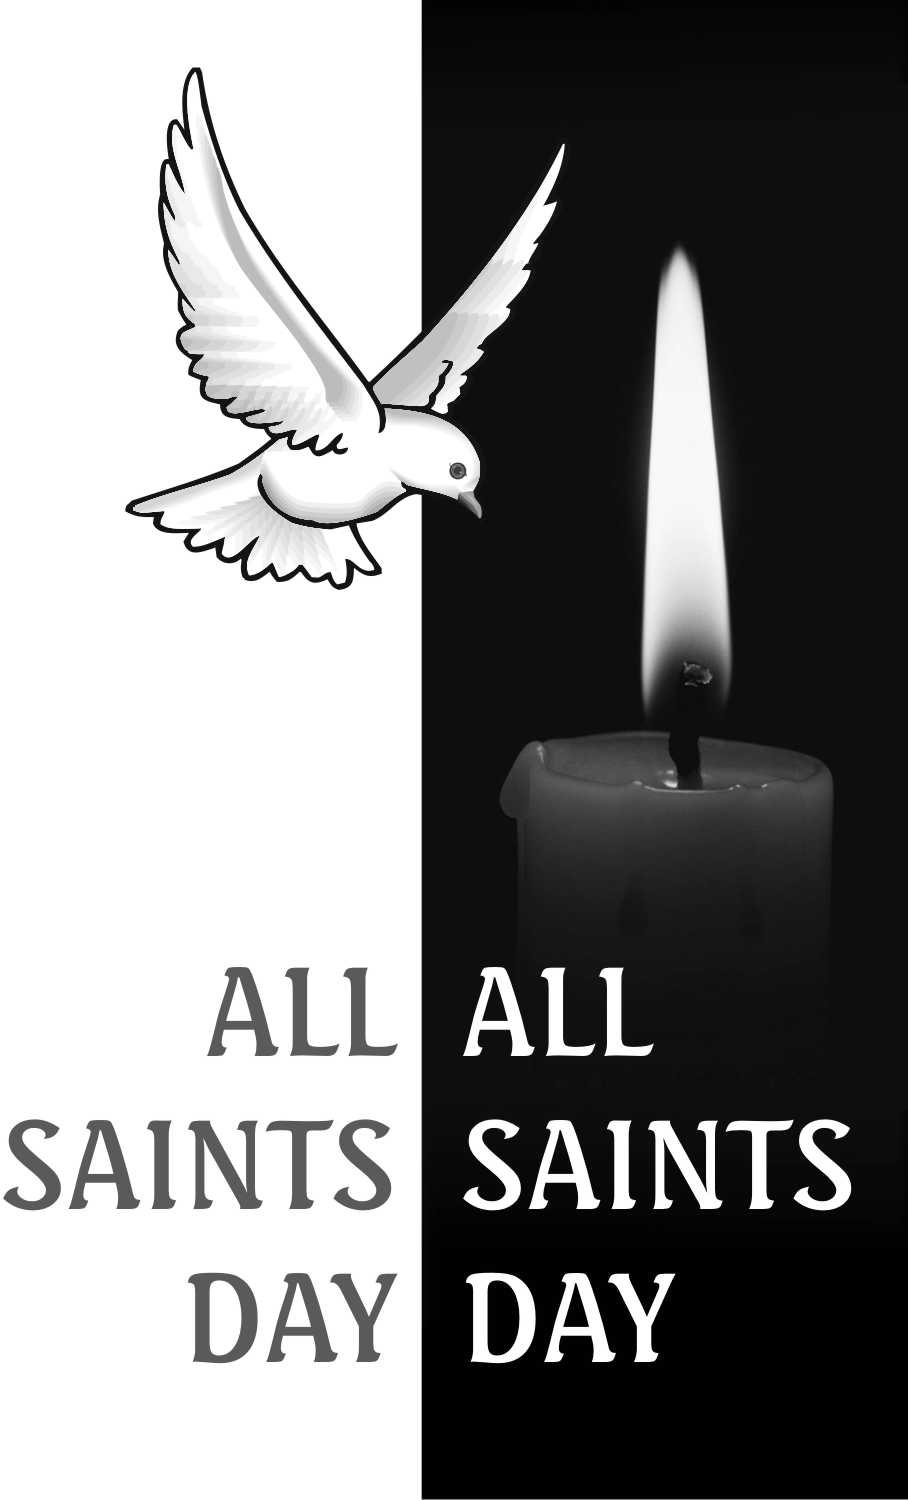 All Saints Day Flying Dove And Candle Picture